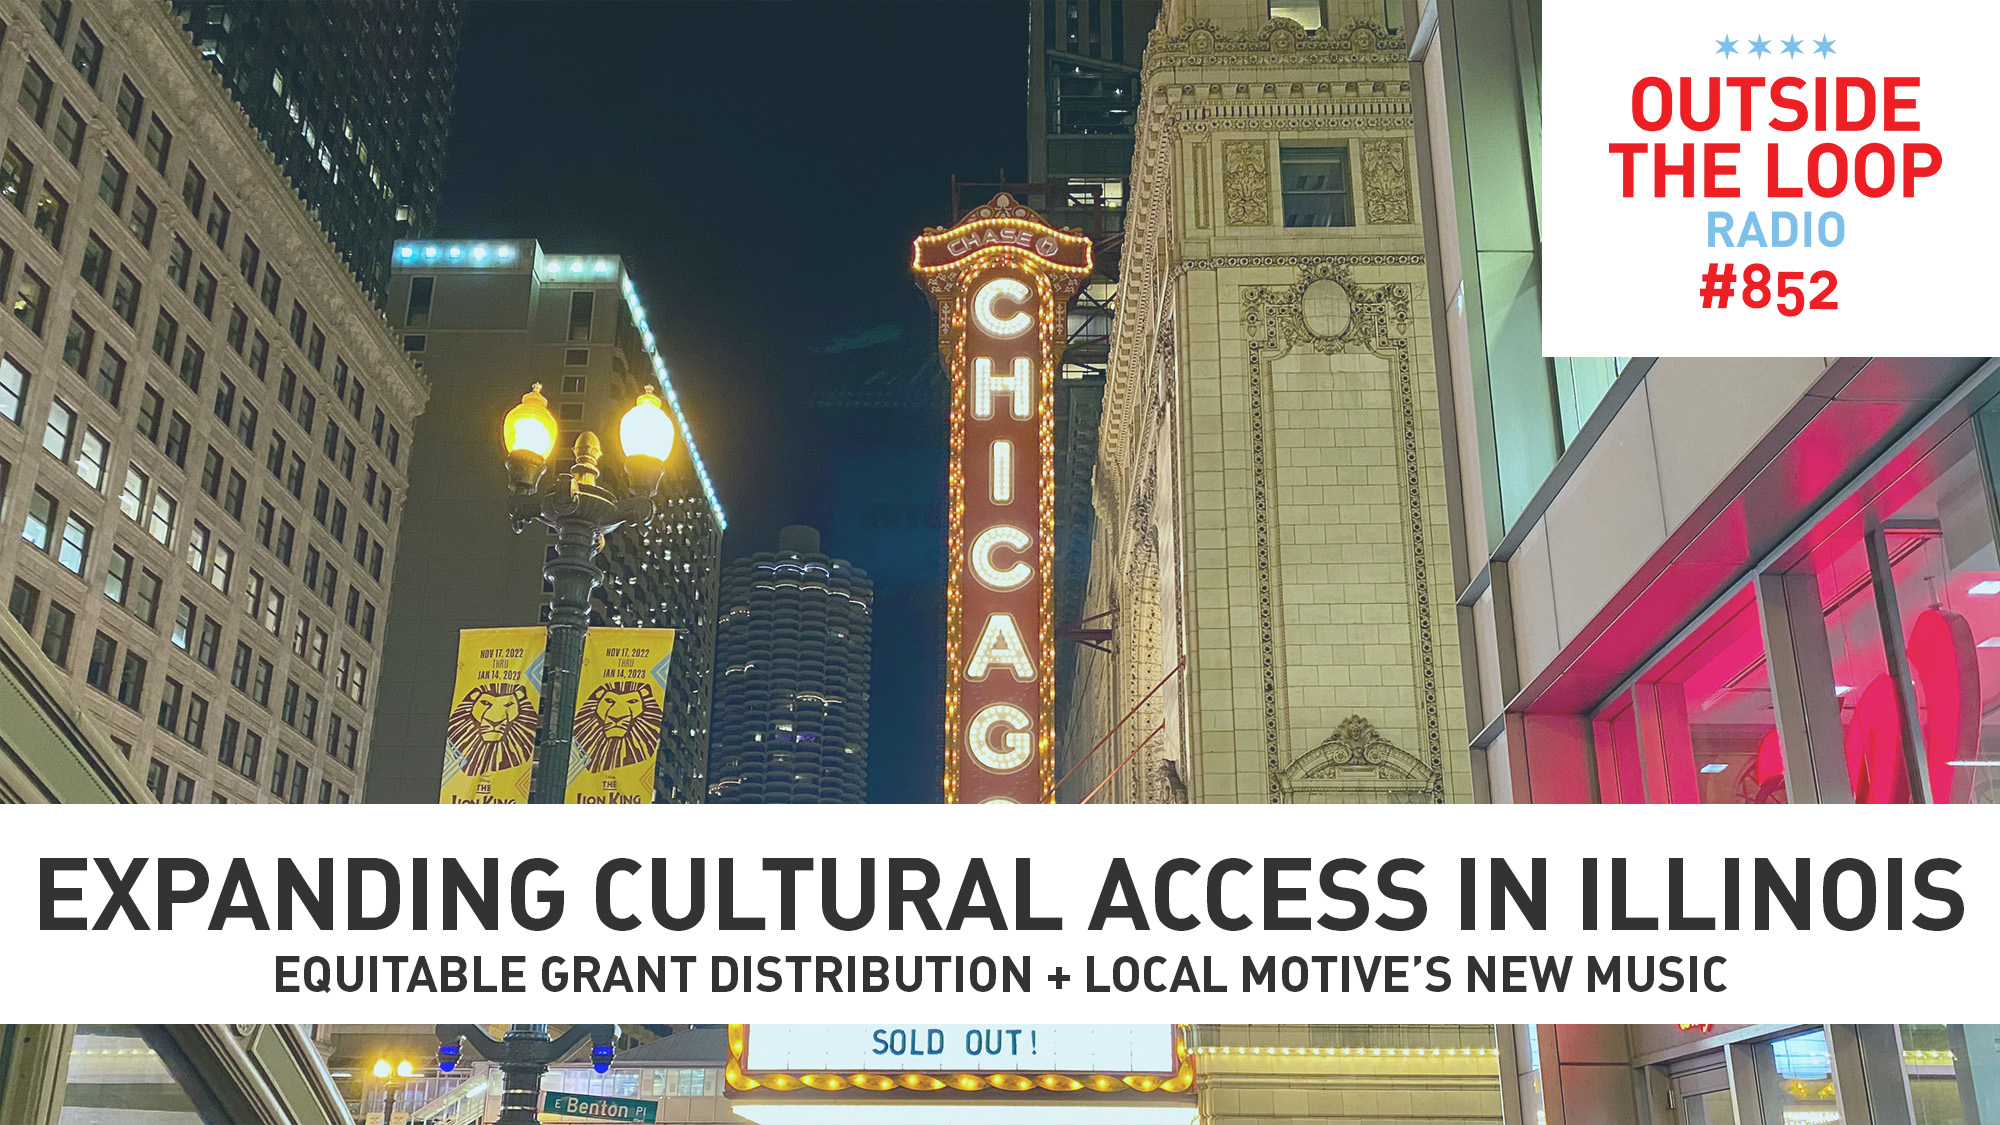 We discuss expanding access to Chicago’s cultural spaces. (Photo credit: Mike Stephen/WGN Radio)